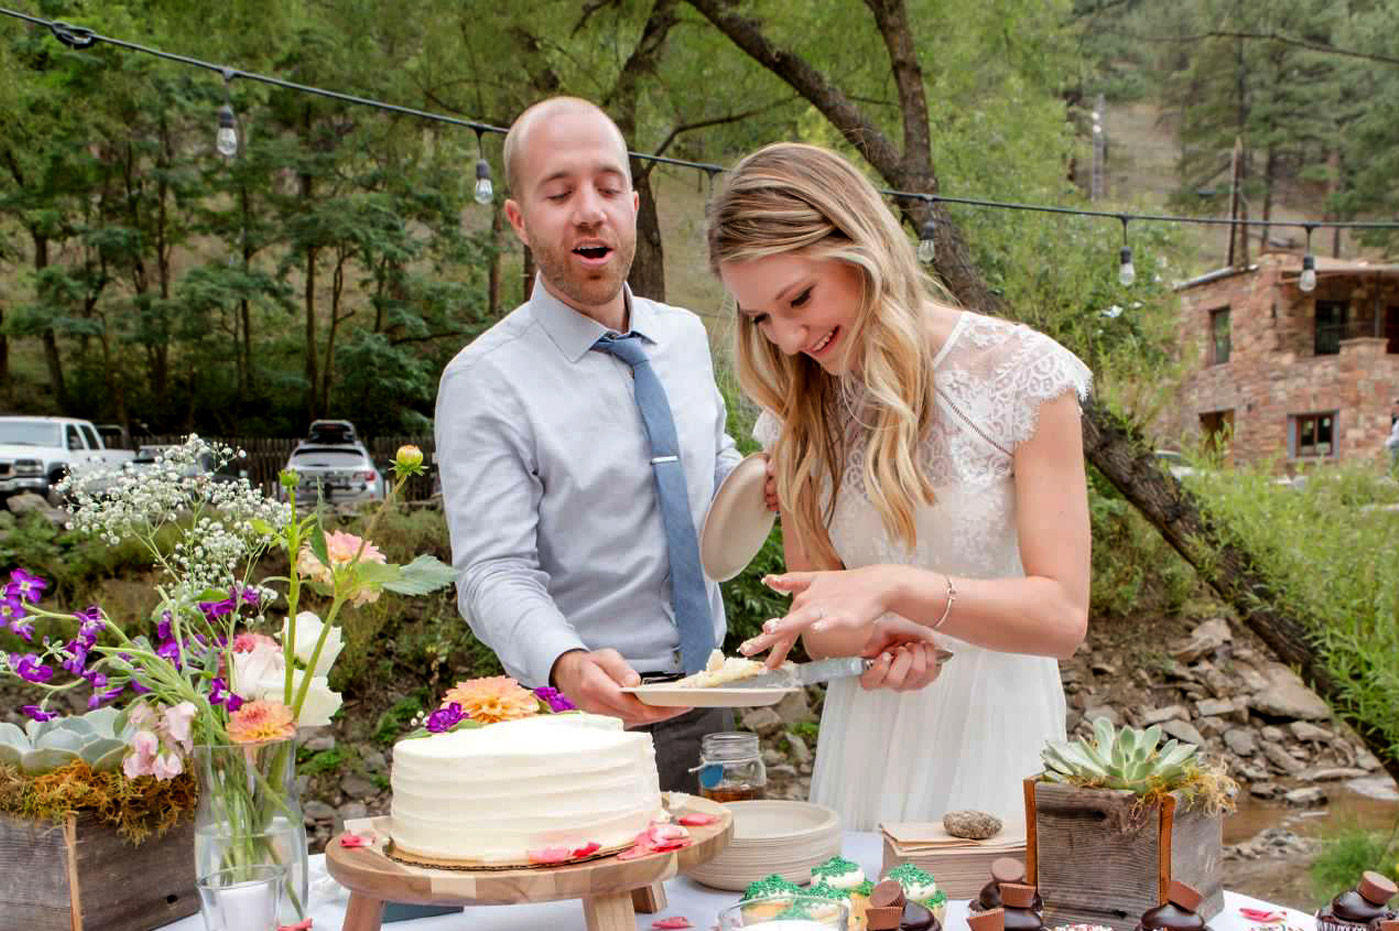 Married couple cutting the cake at their elopement